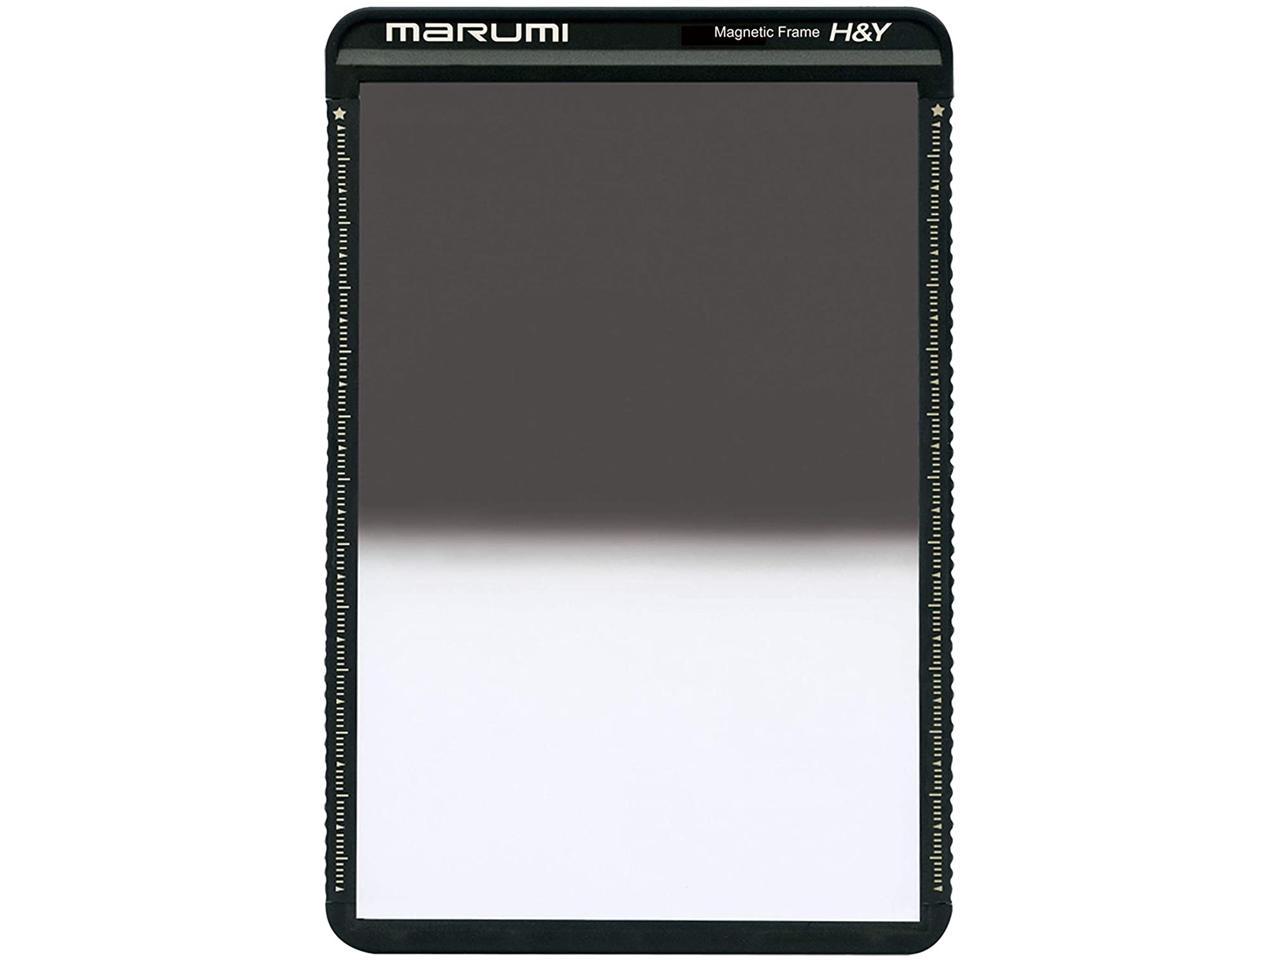 Marumi 100mm Hard Grad ND4 Magnetic Filter Schott Glass H&Y 100 x 150mm Hot Swap Neutral Density ND0.6 GND 2 Stop Made in Japan 